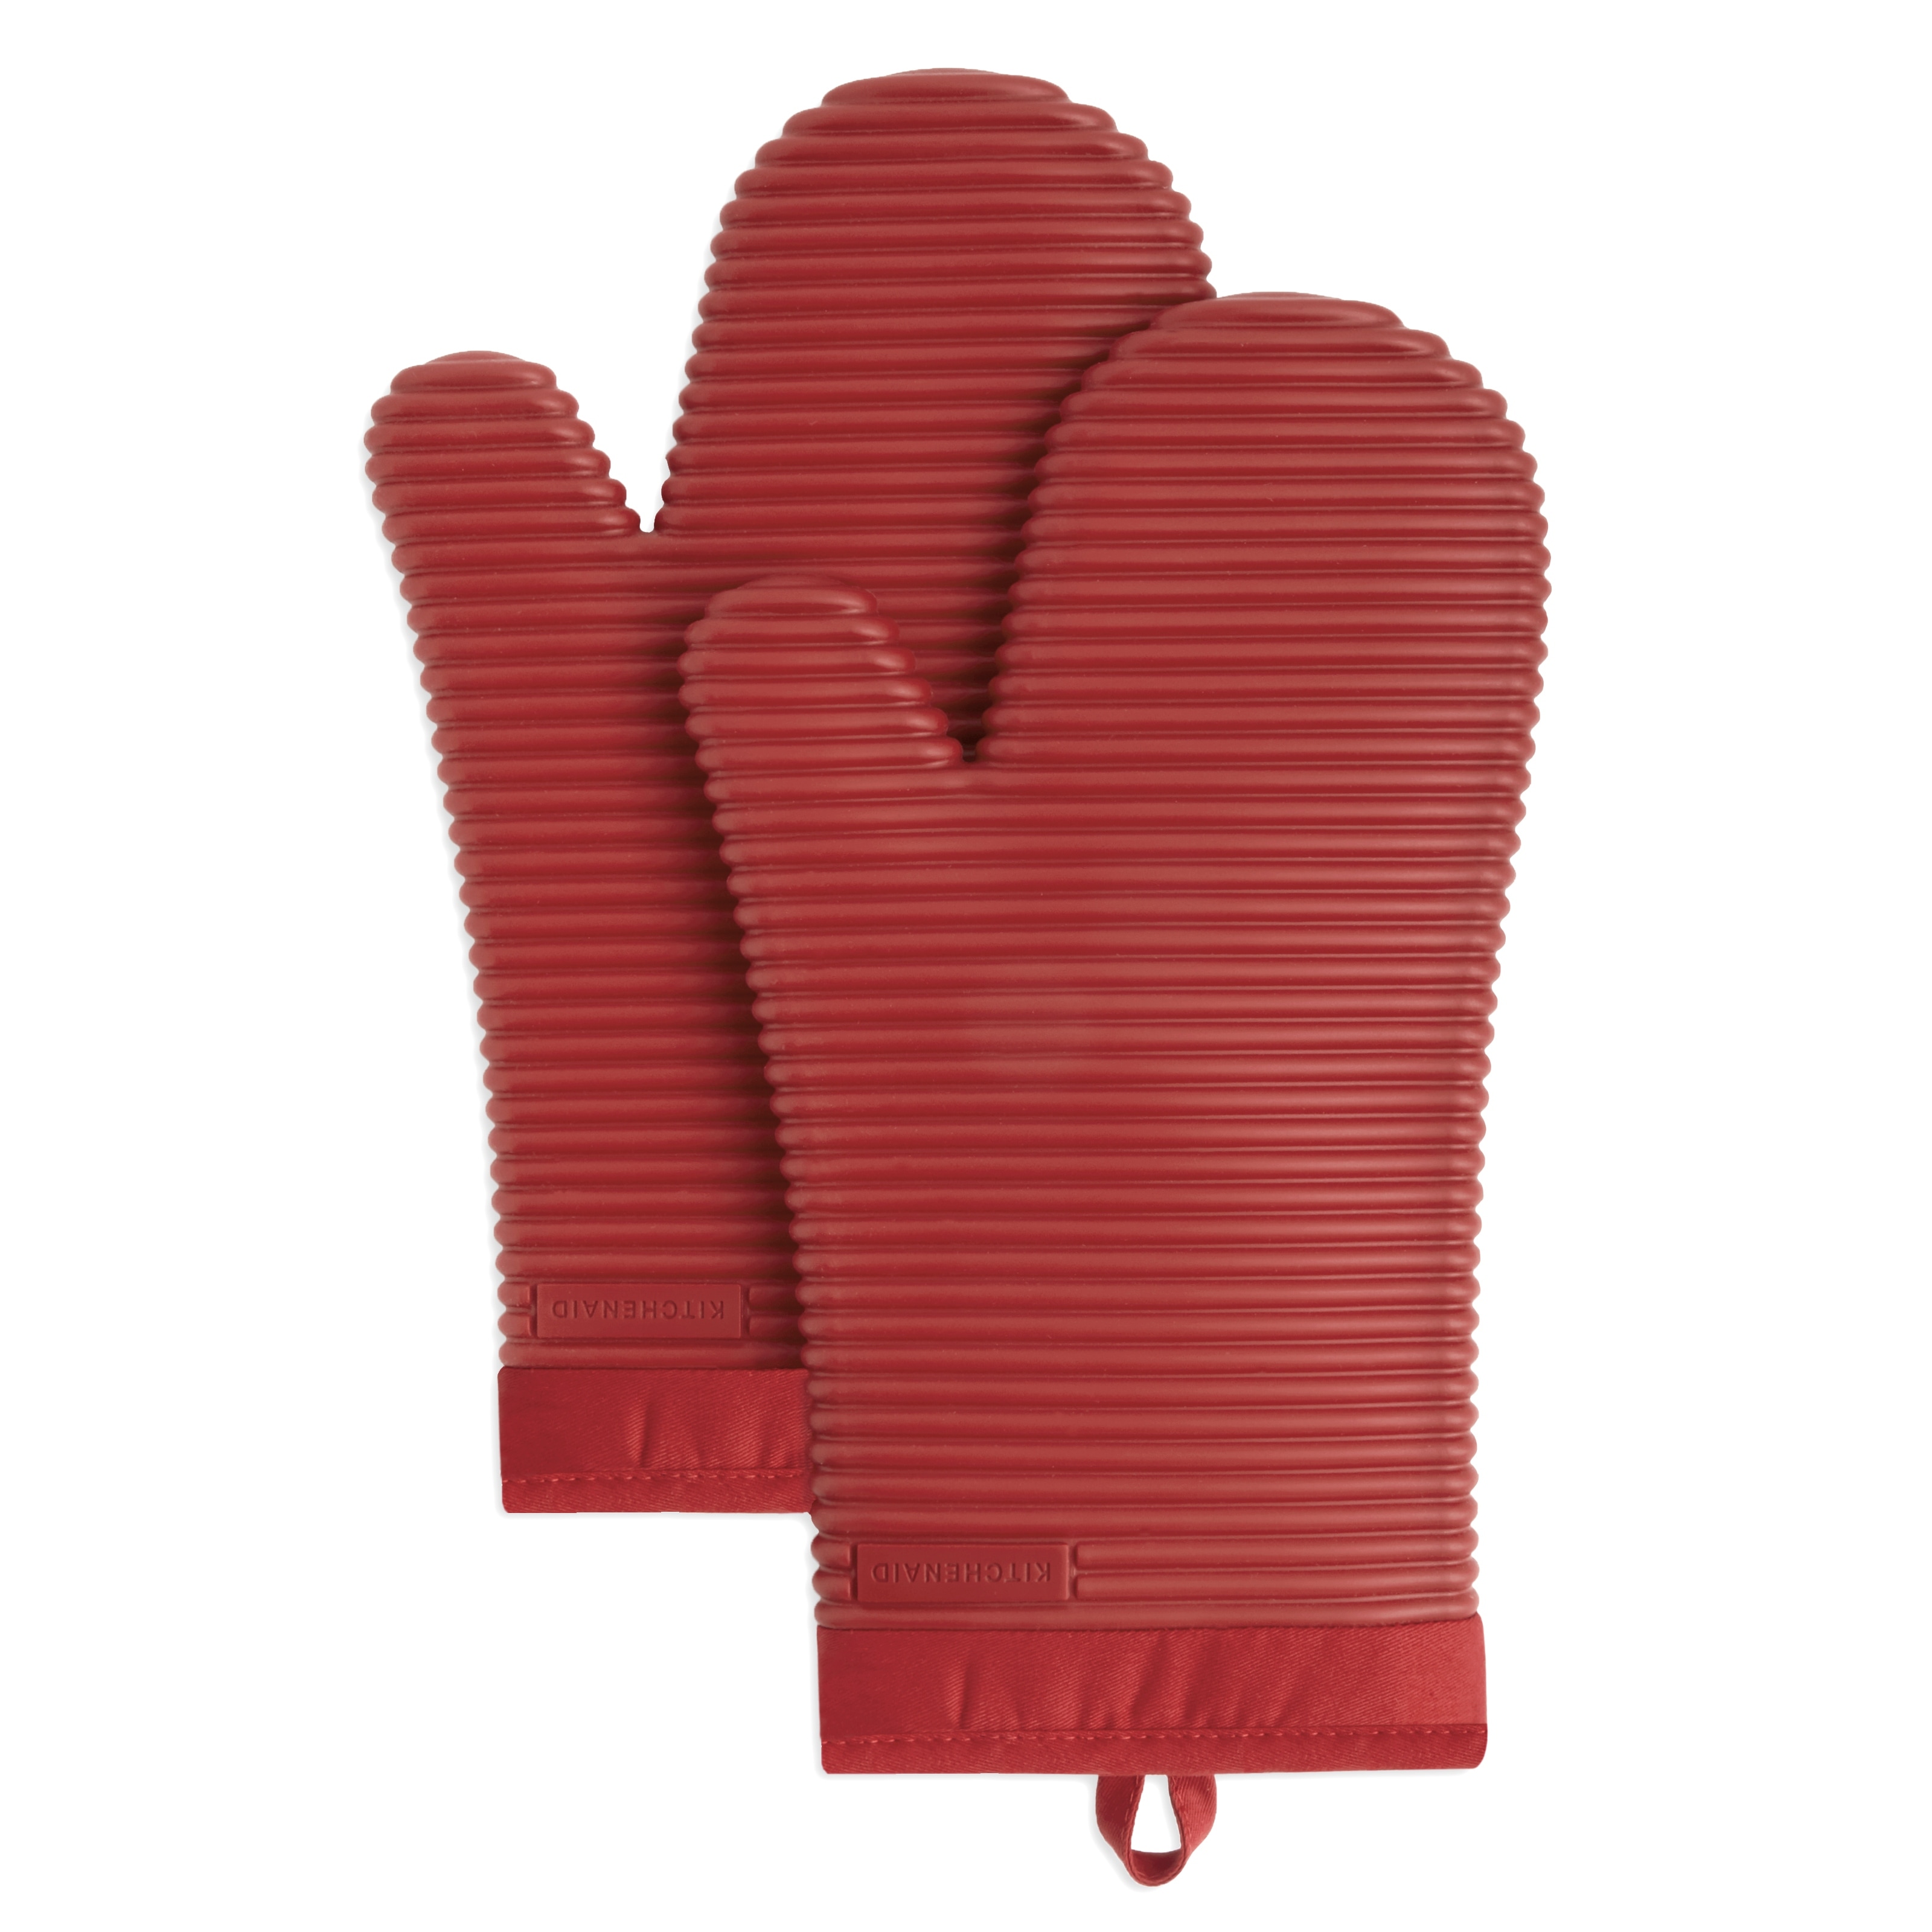 https://ak1.ostkcdn.com/images/products/is/images/direct/66555dcf8ef08c929fb9c811a169adf964bc4d14/KitchenAid-Ribbed-Soft-Silicone-Oven-Mitt-Set%2C-7.5%22x13%22%2C-2-Pack.jpg